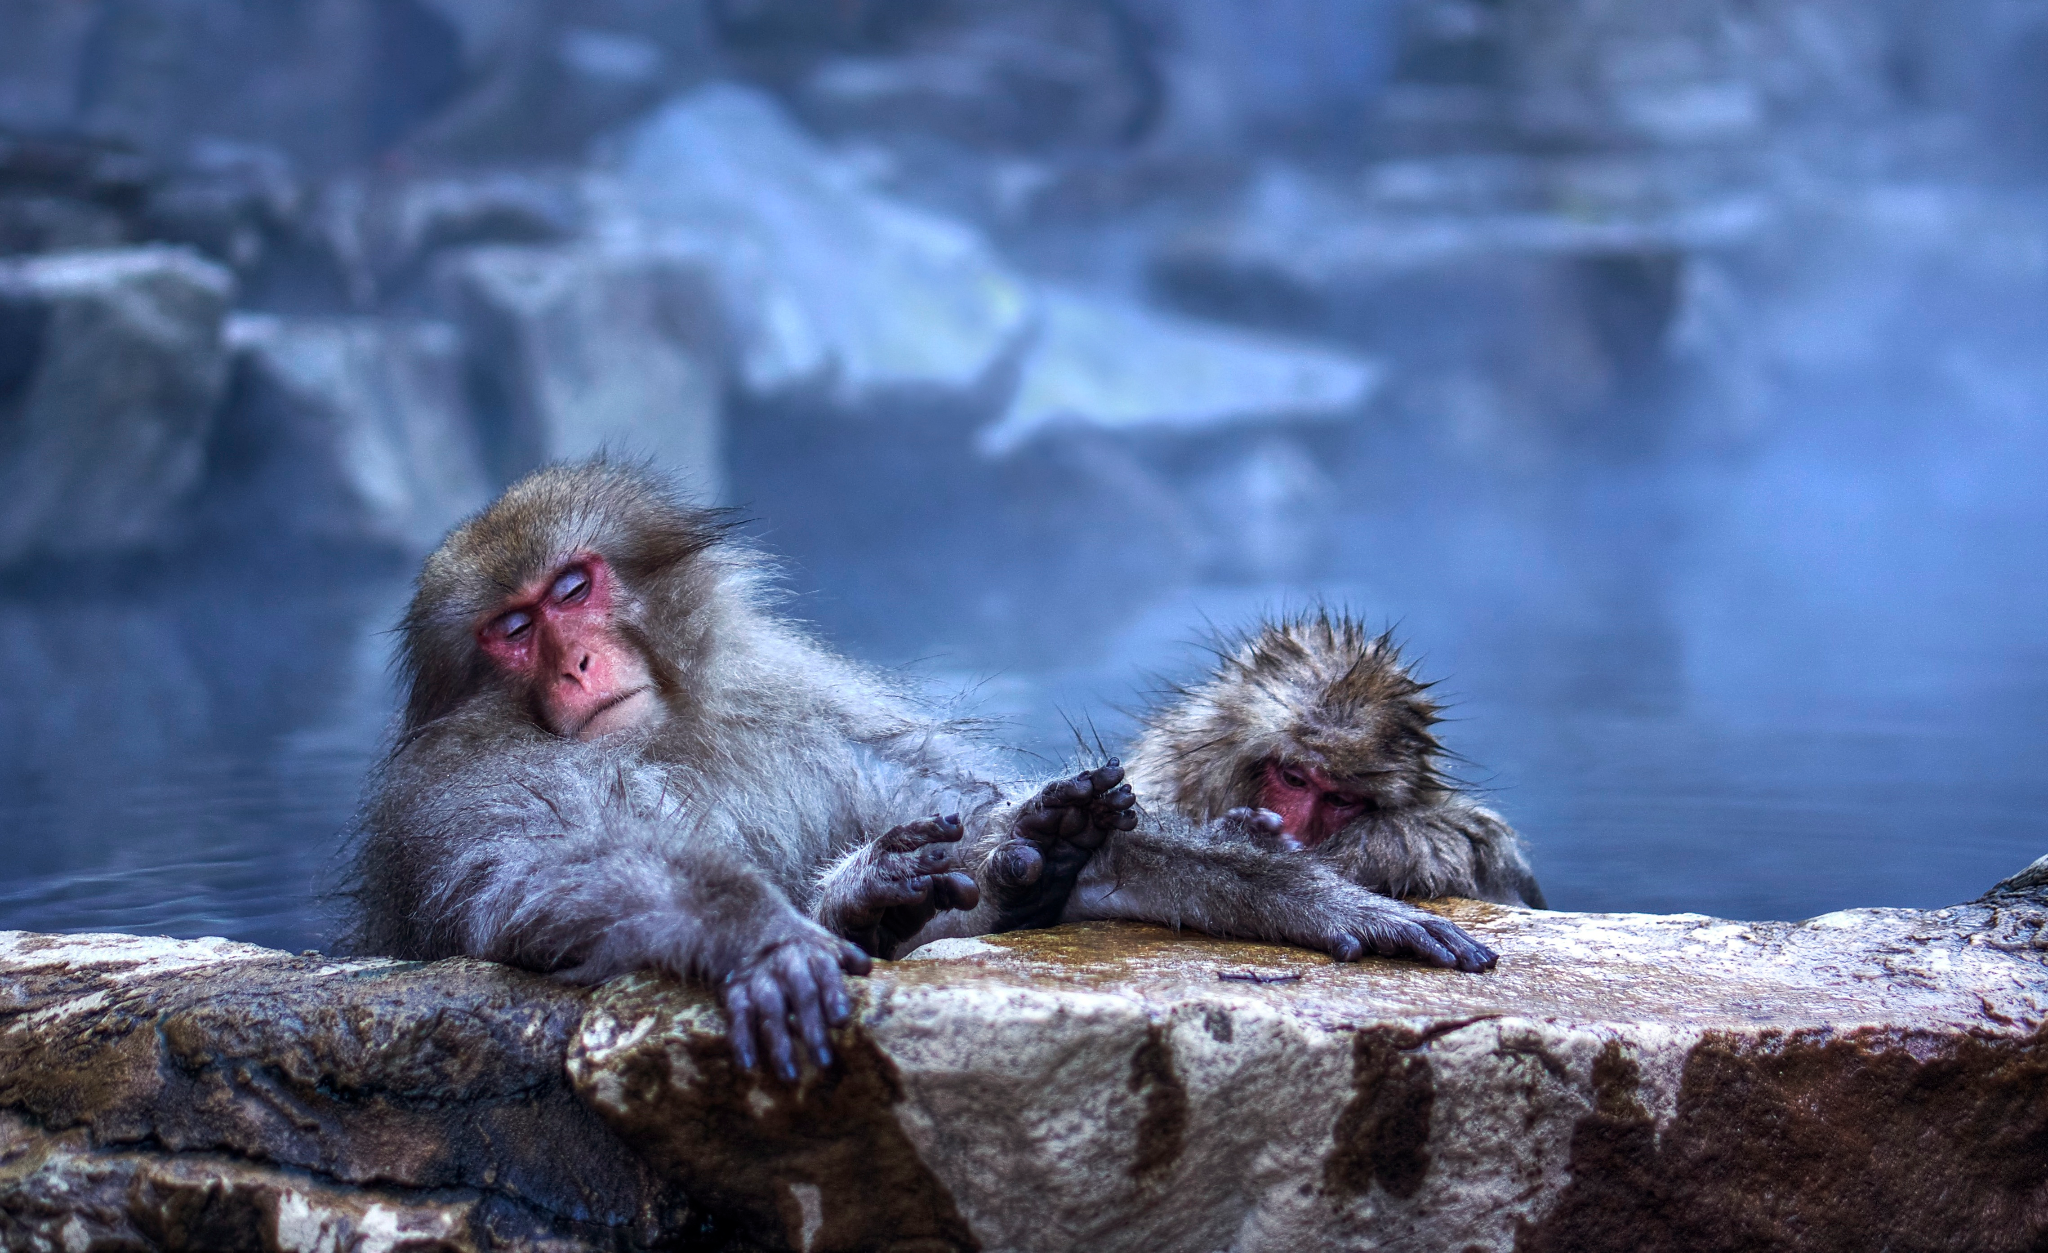 Two monkeys in a hot spring.